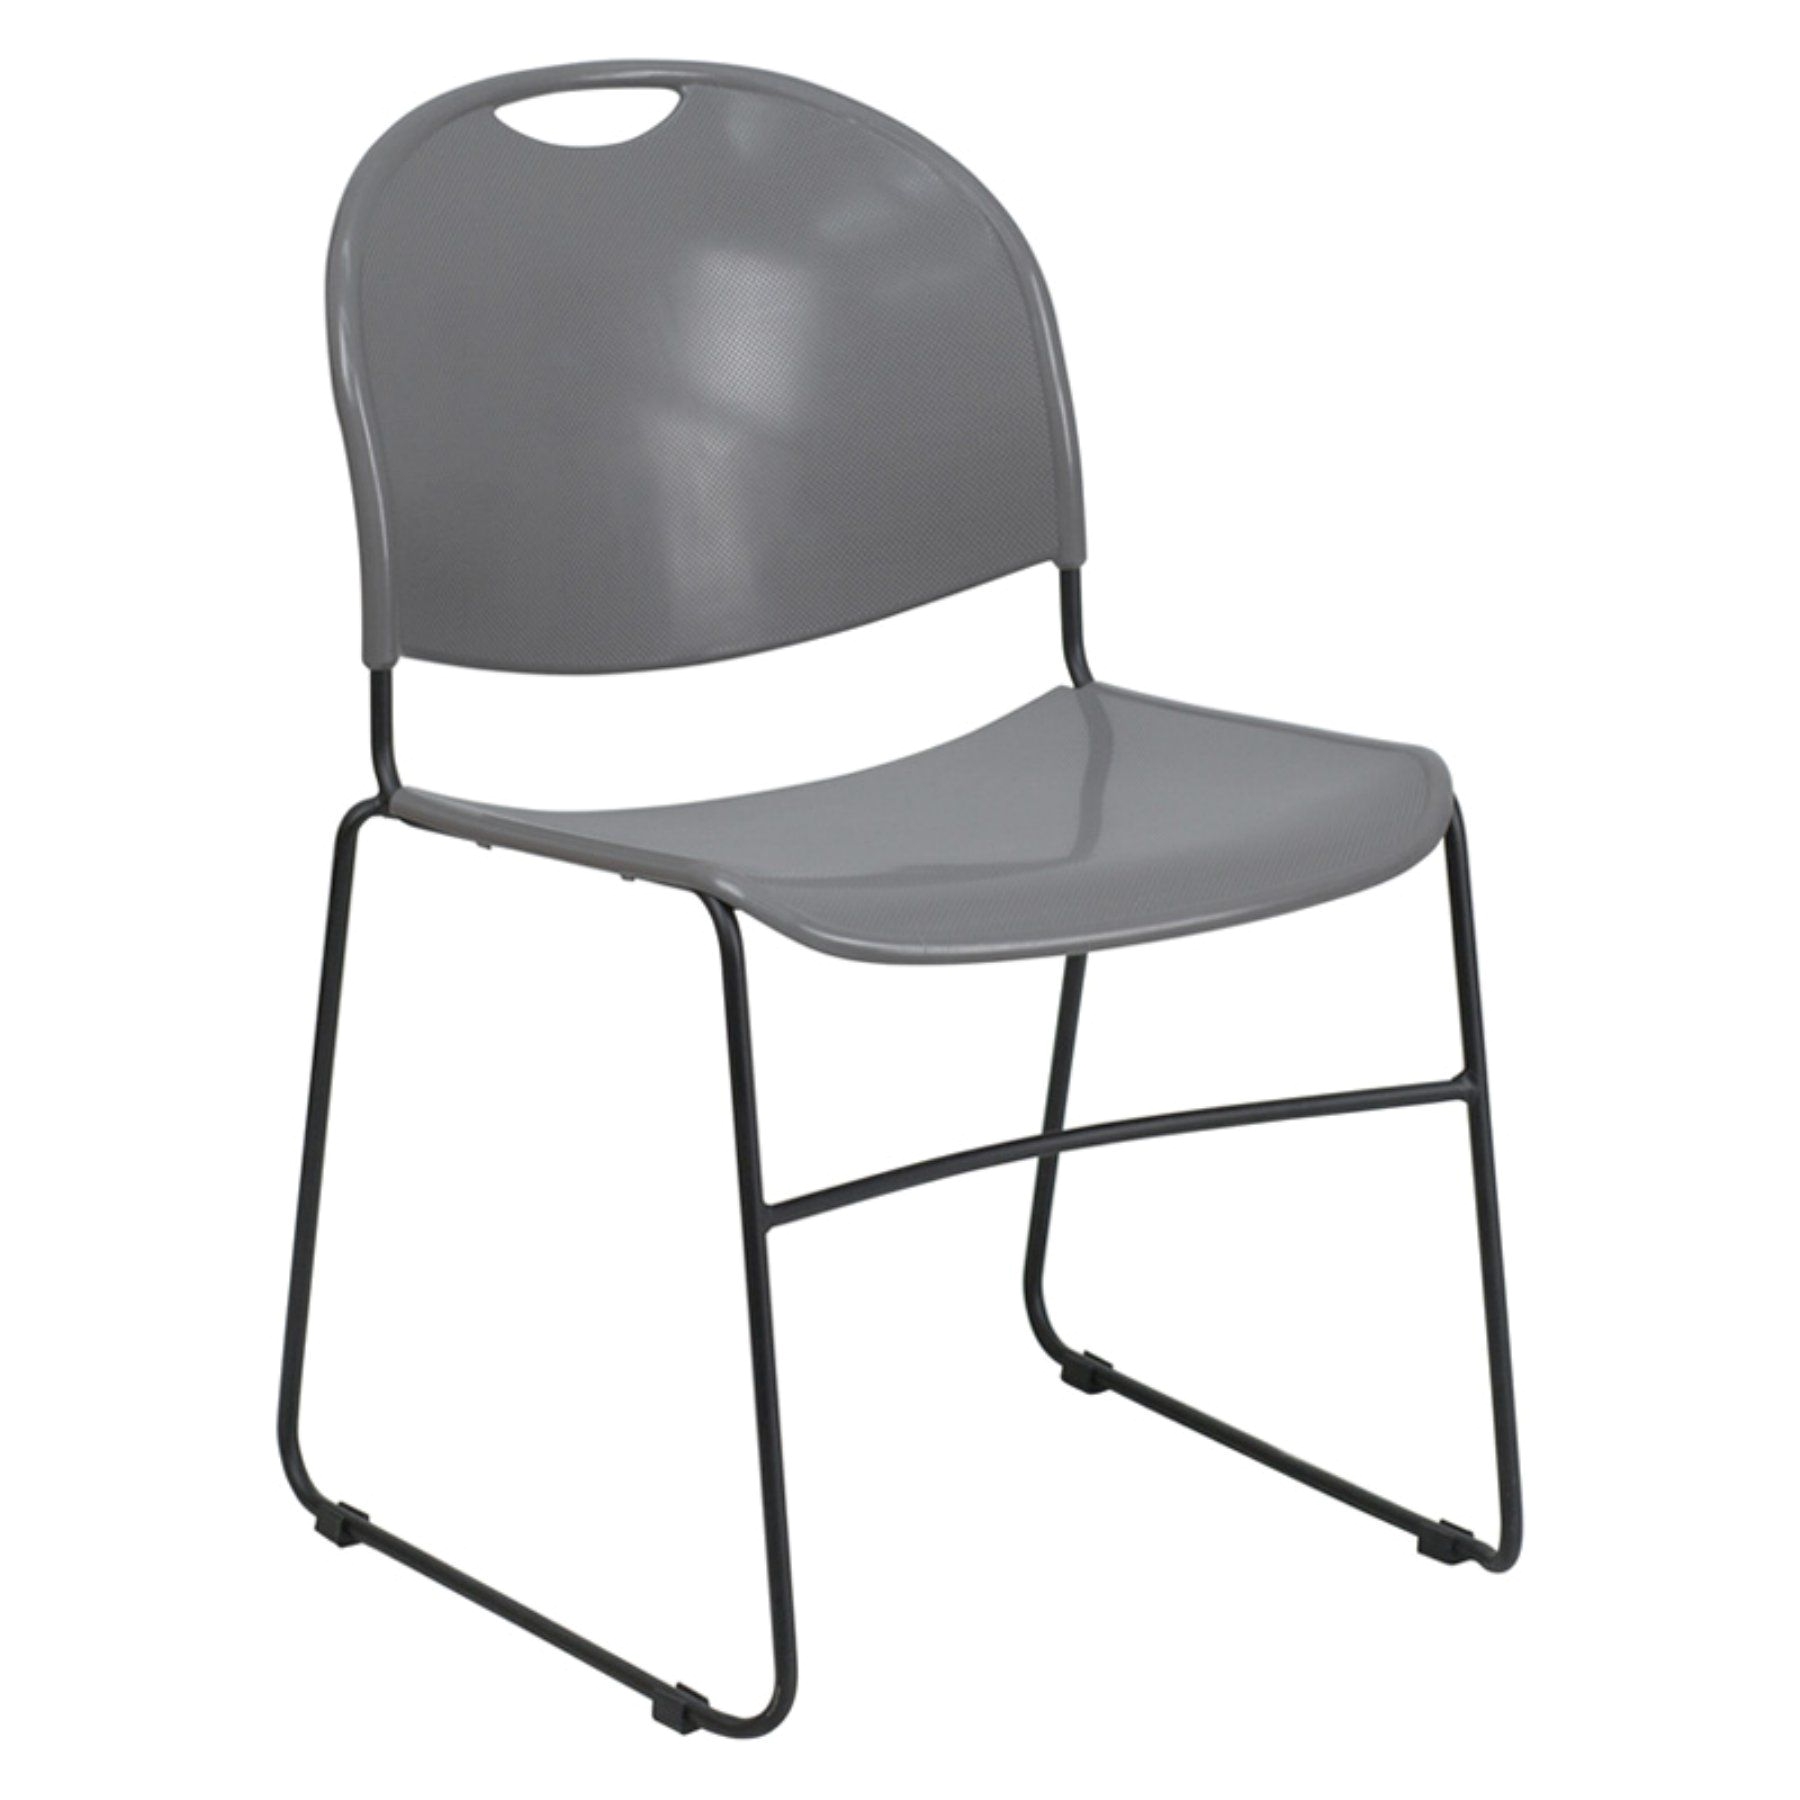 Hercules Stacking Chairs Hercules Series High Density Ultra Compact Stack Chair Rut 188 Gy